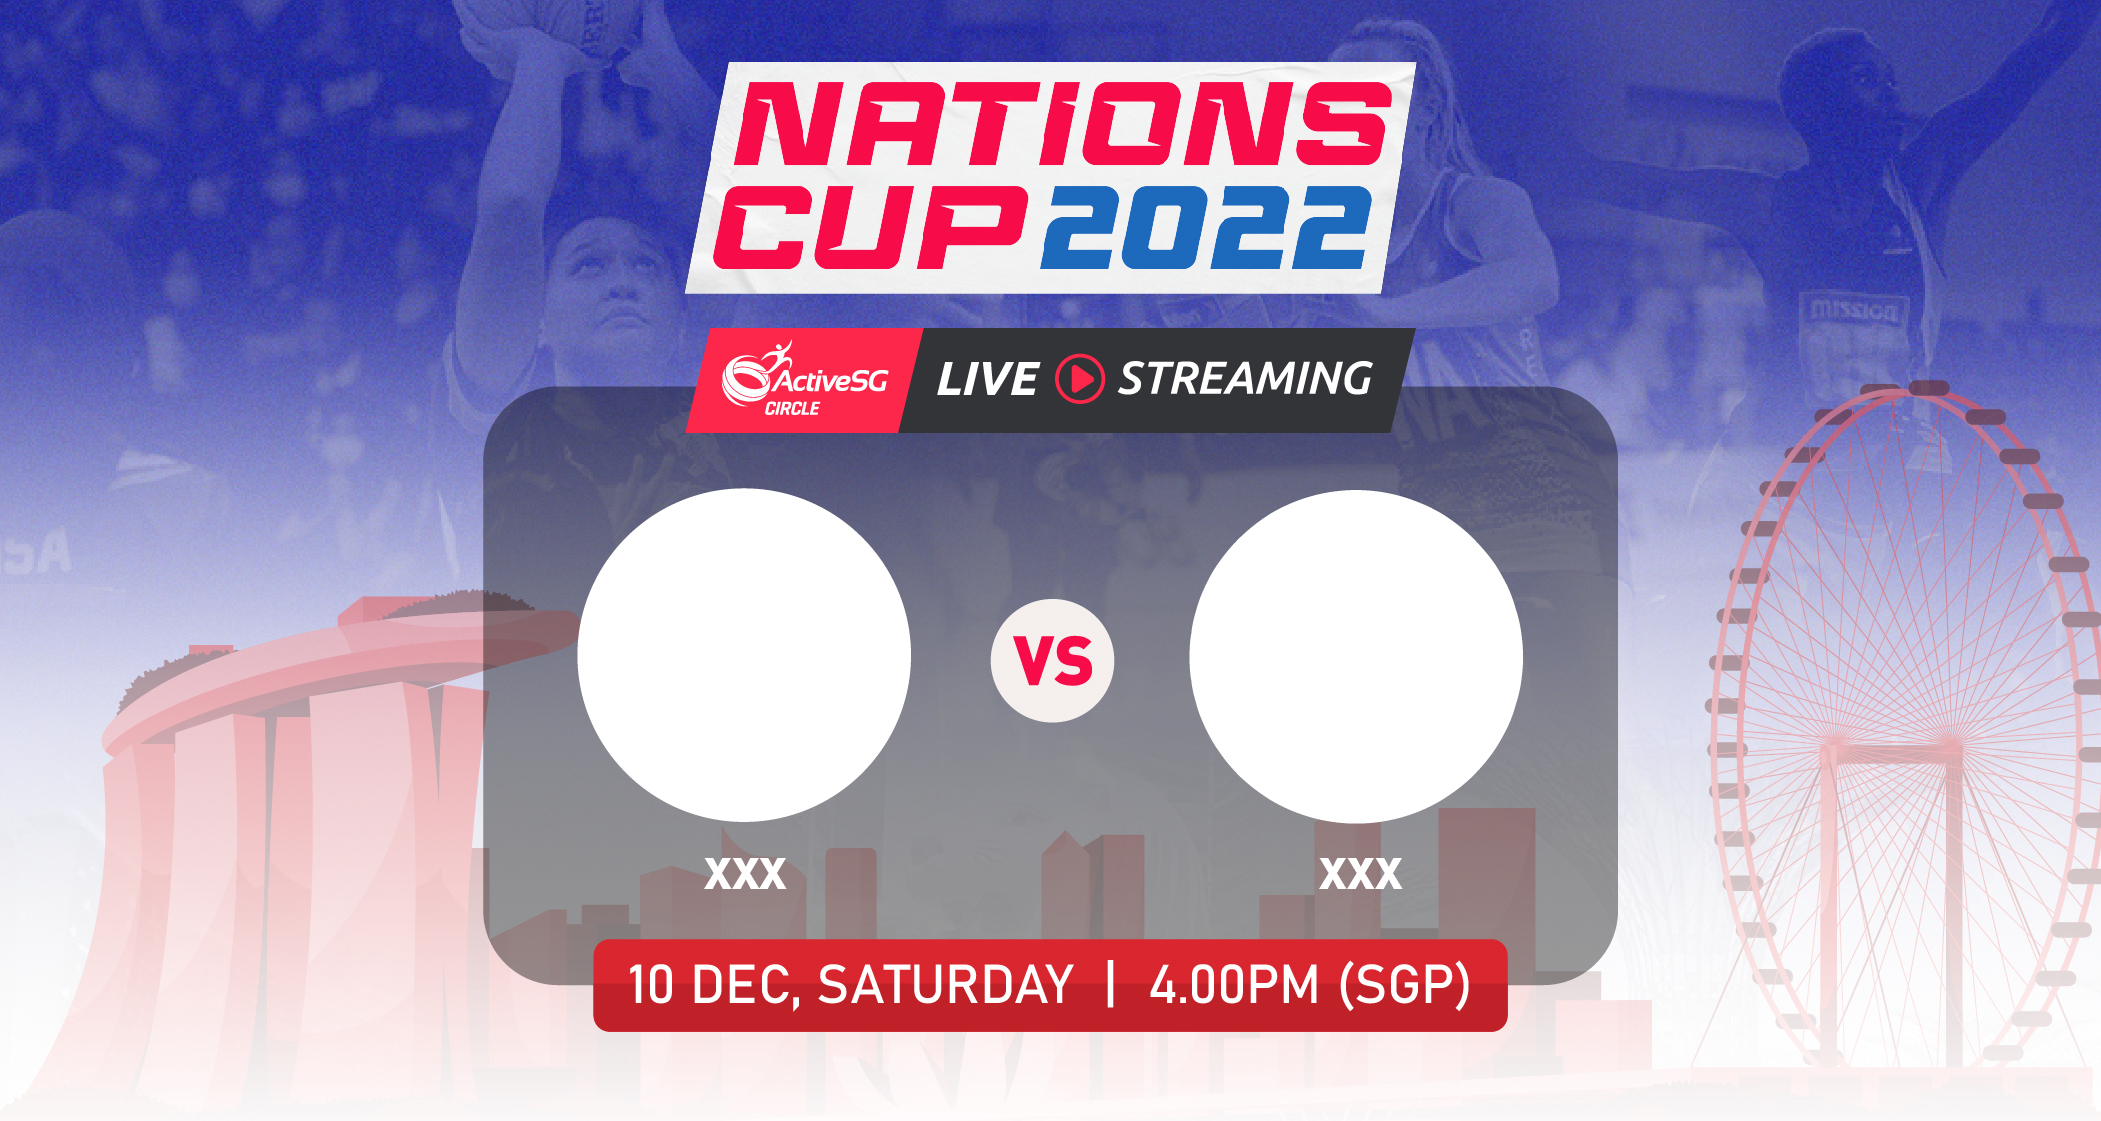 🔴 LIVE: 1st Position vs 2nd Position | Final | Nations Cup 2022